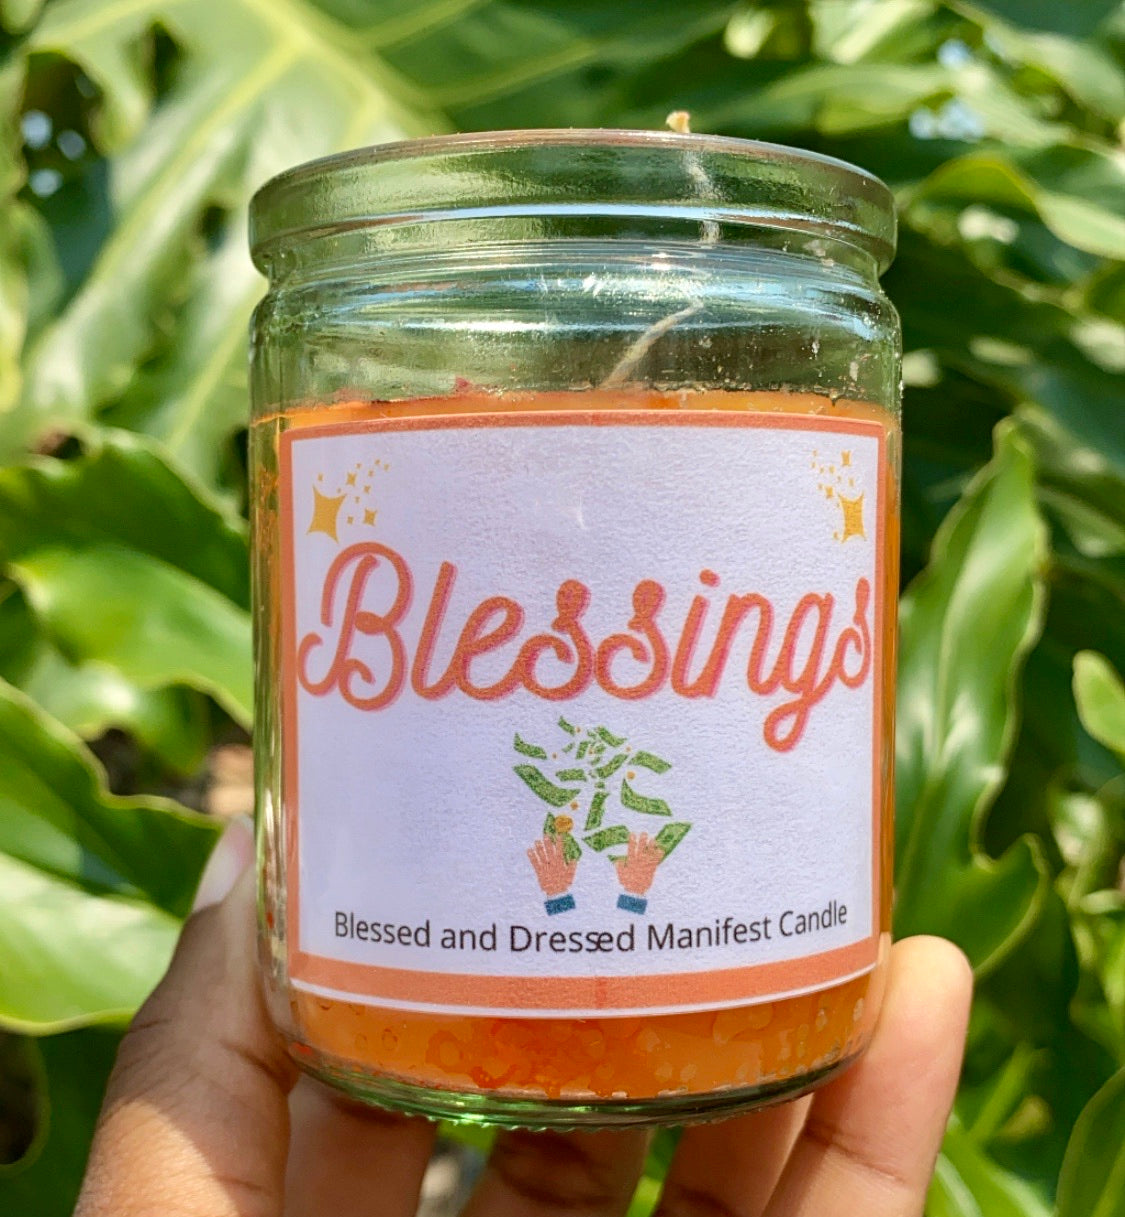 Blessings (Blessed and Dressed Manifest Candle)